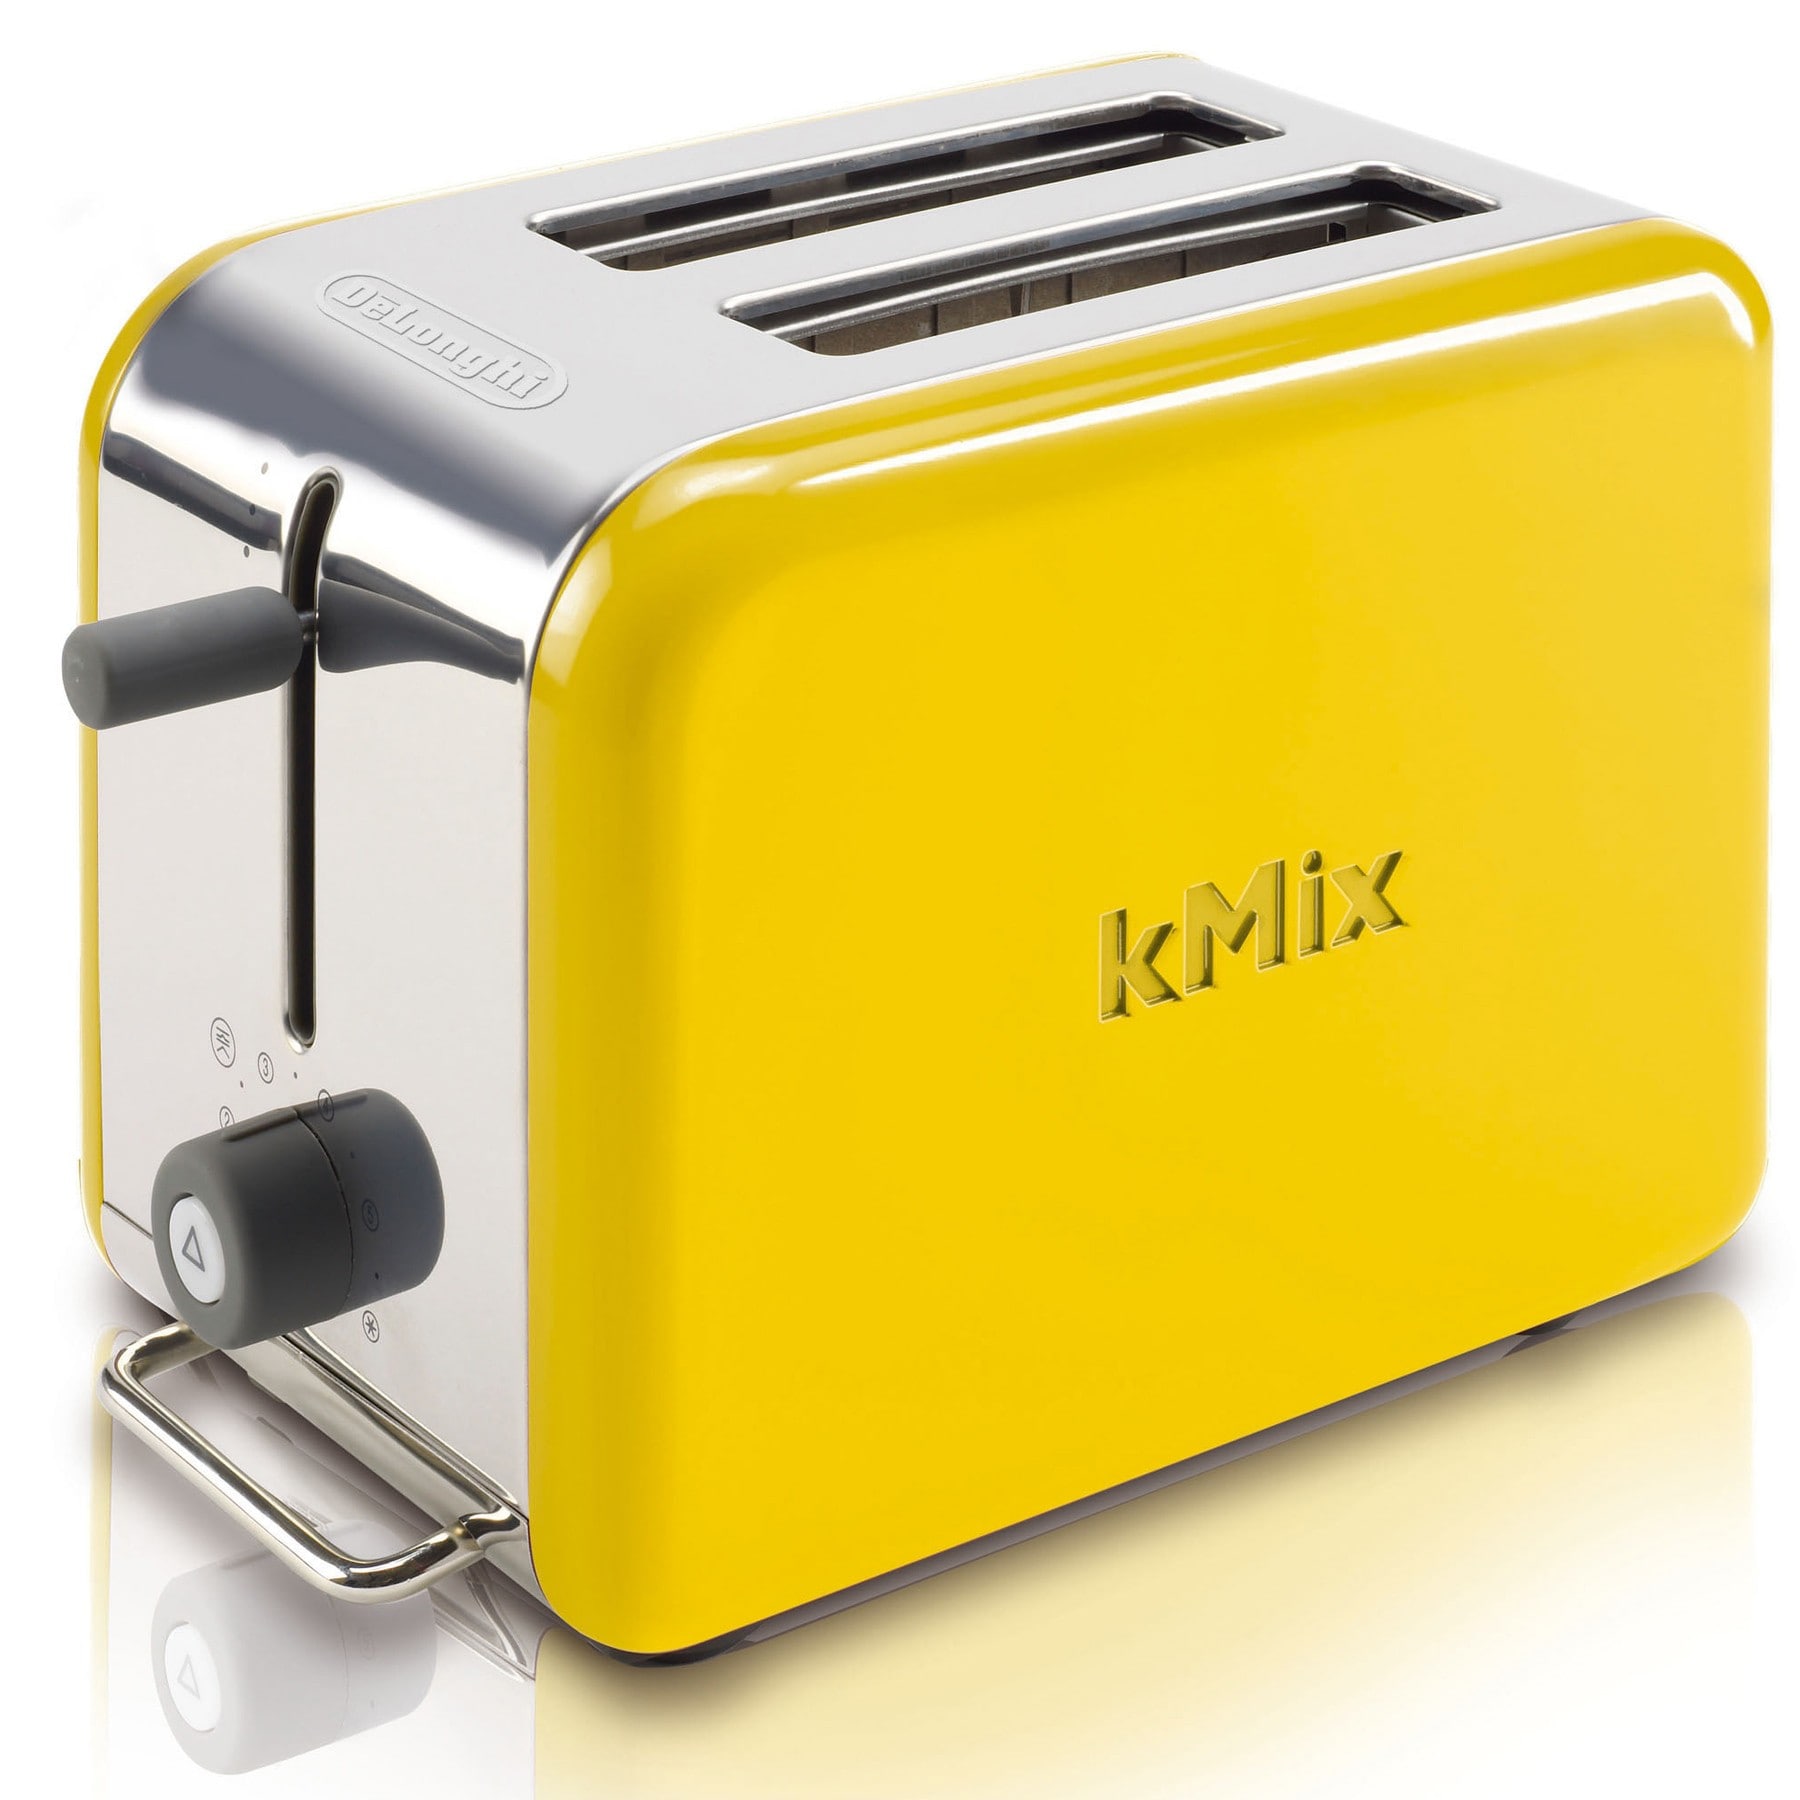 DeLonghi kMix Yellow 2-slice Toaster - Overstock Shopping - Great Deals